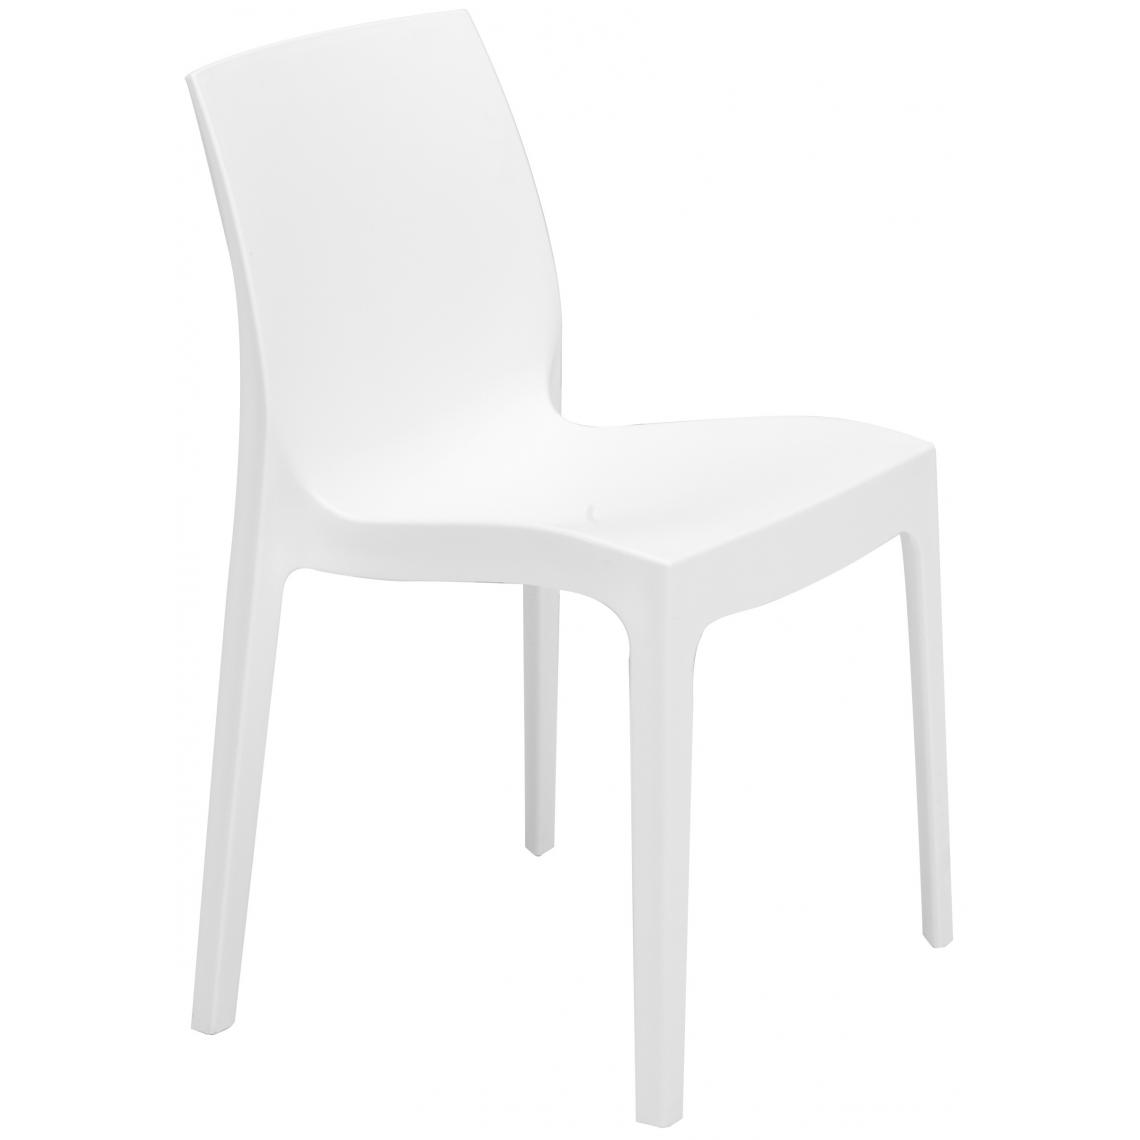 3S. x Home - Chaise Design Blanche ISTANBUL - Chaises